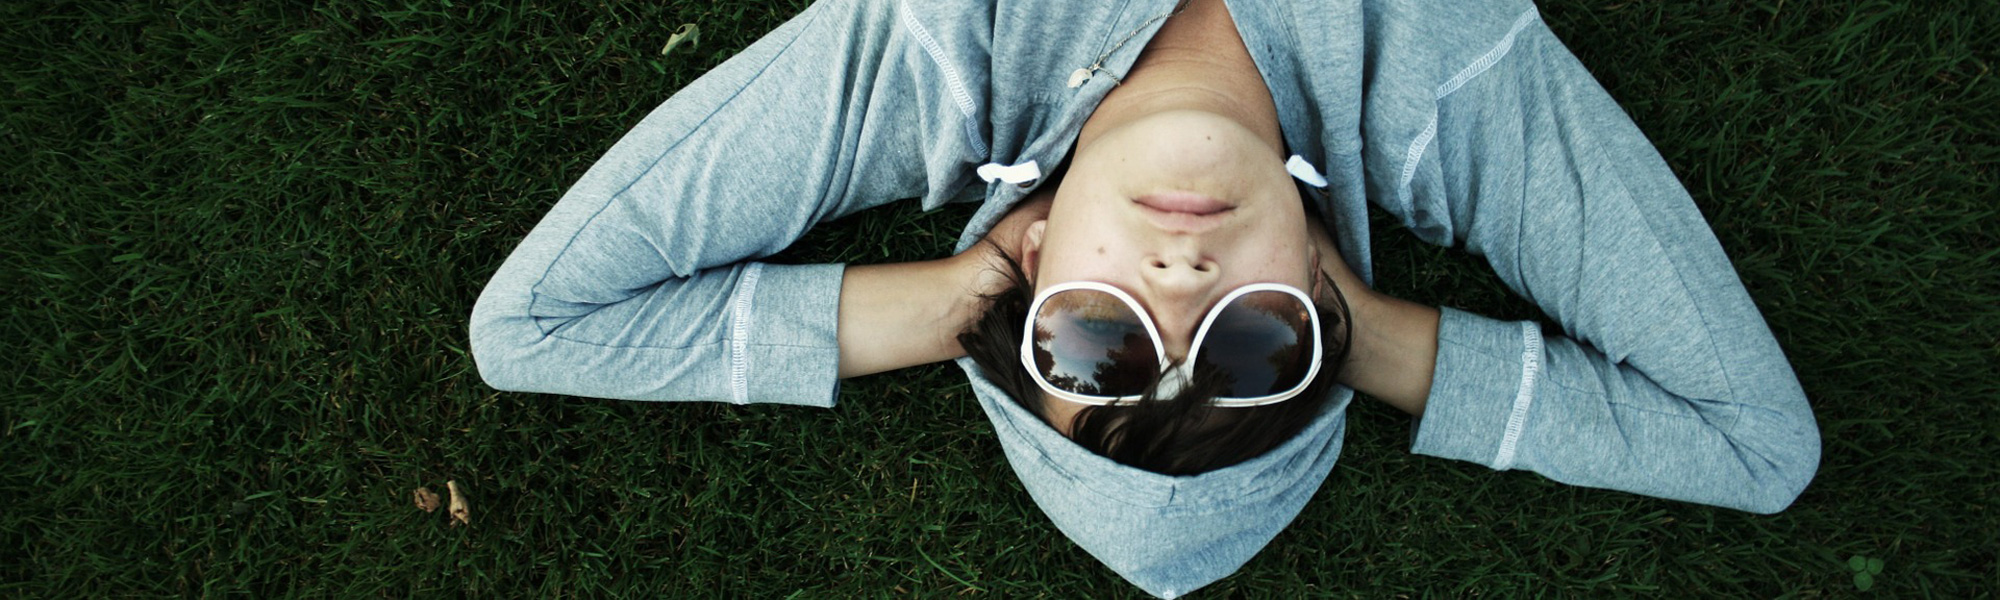 Man wearing sunglasses in the grass